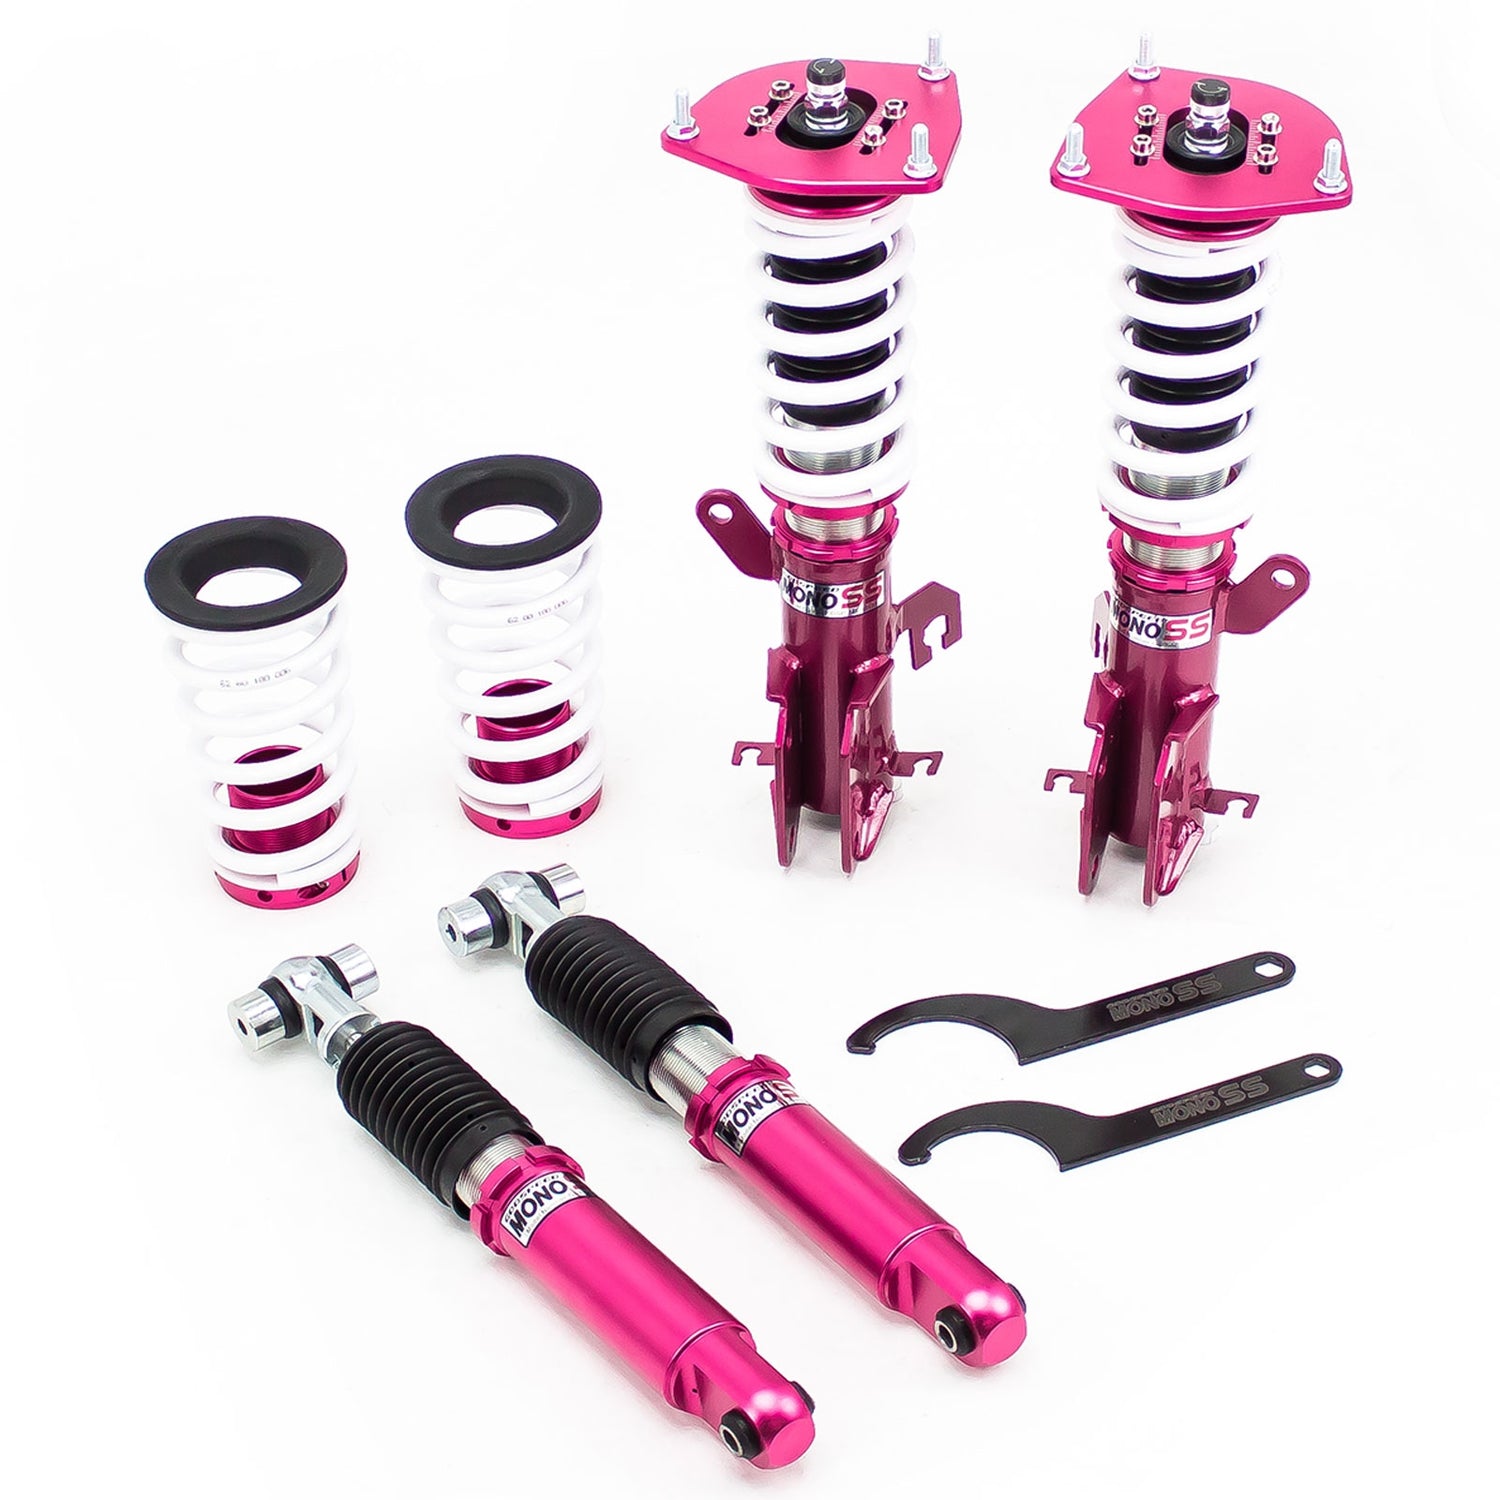 Godspeed MSS0135 MonoSS Coilover Lowering Kit, Fully Adjustable, Ride Height, Spring Tension And 16 Click Damping, Nissan Sentra(B16) 2007-12